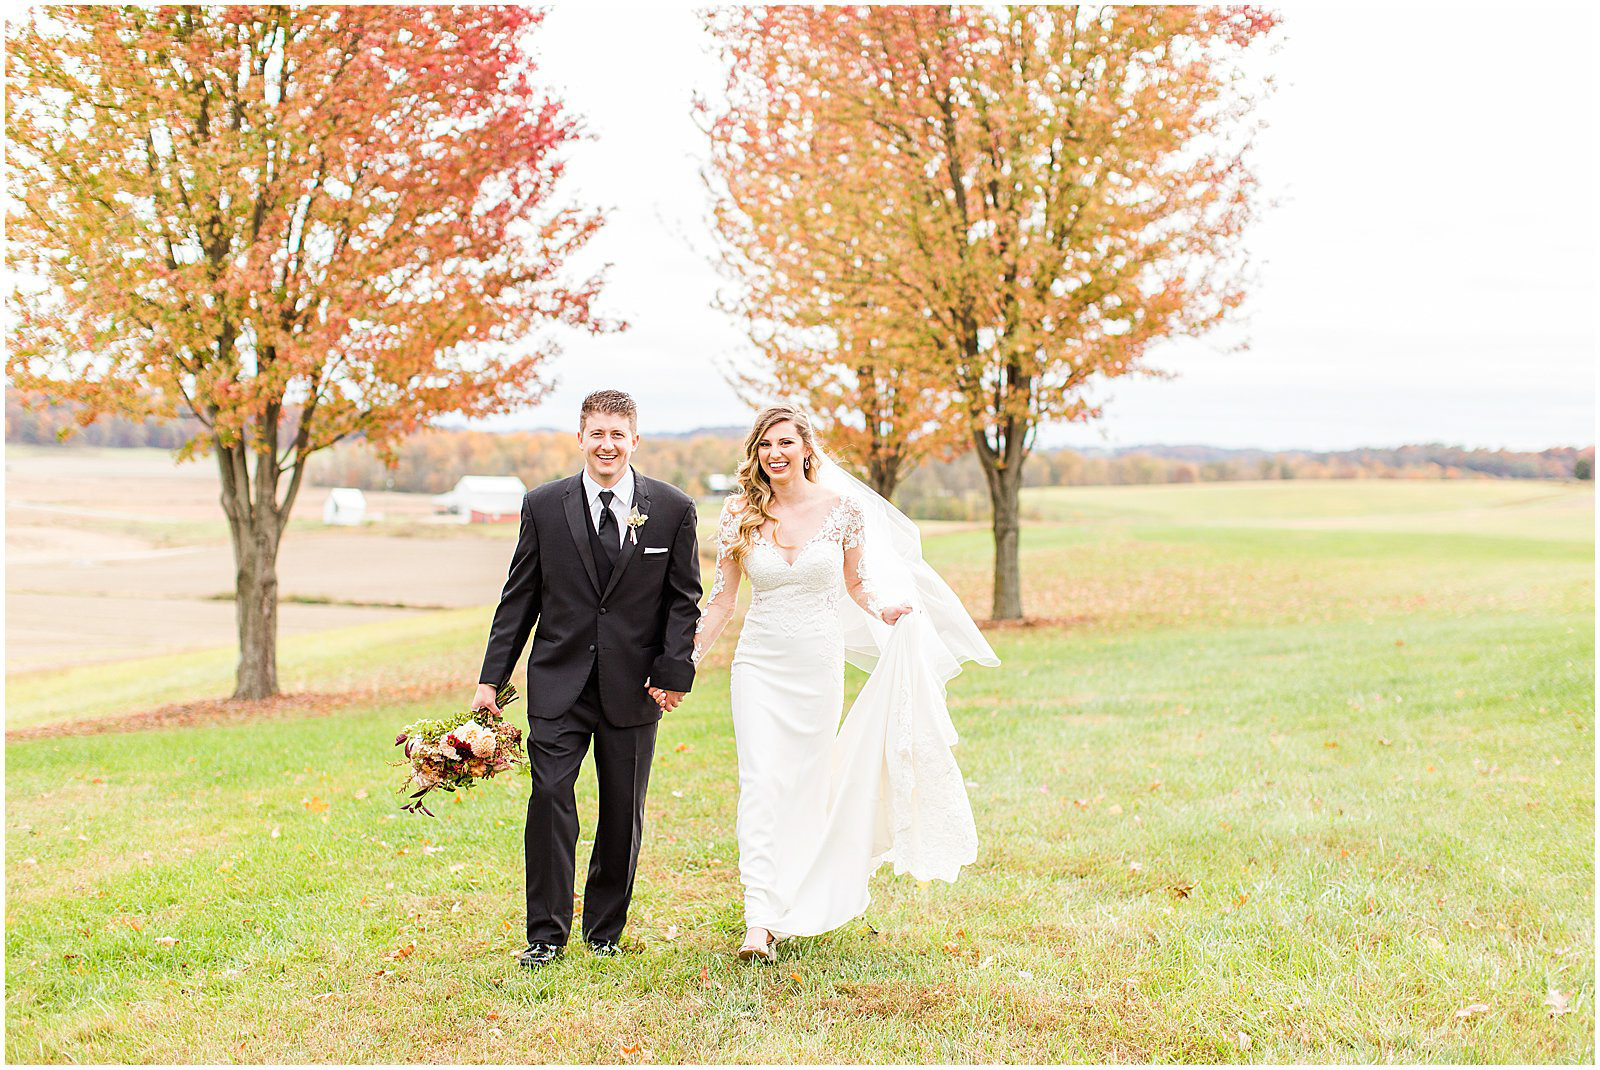 A Romantic Fall Wedding in Ferdinand, IN | Tori and Kyle | Bret and Brandie Photography 0063.jpg